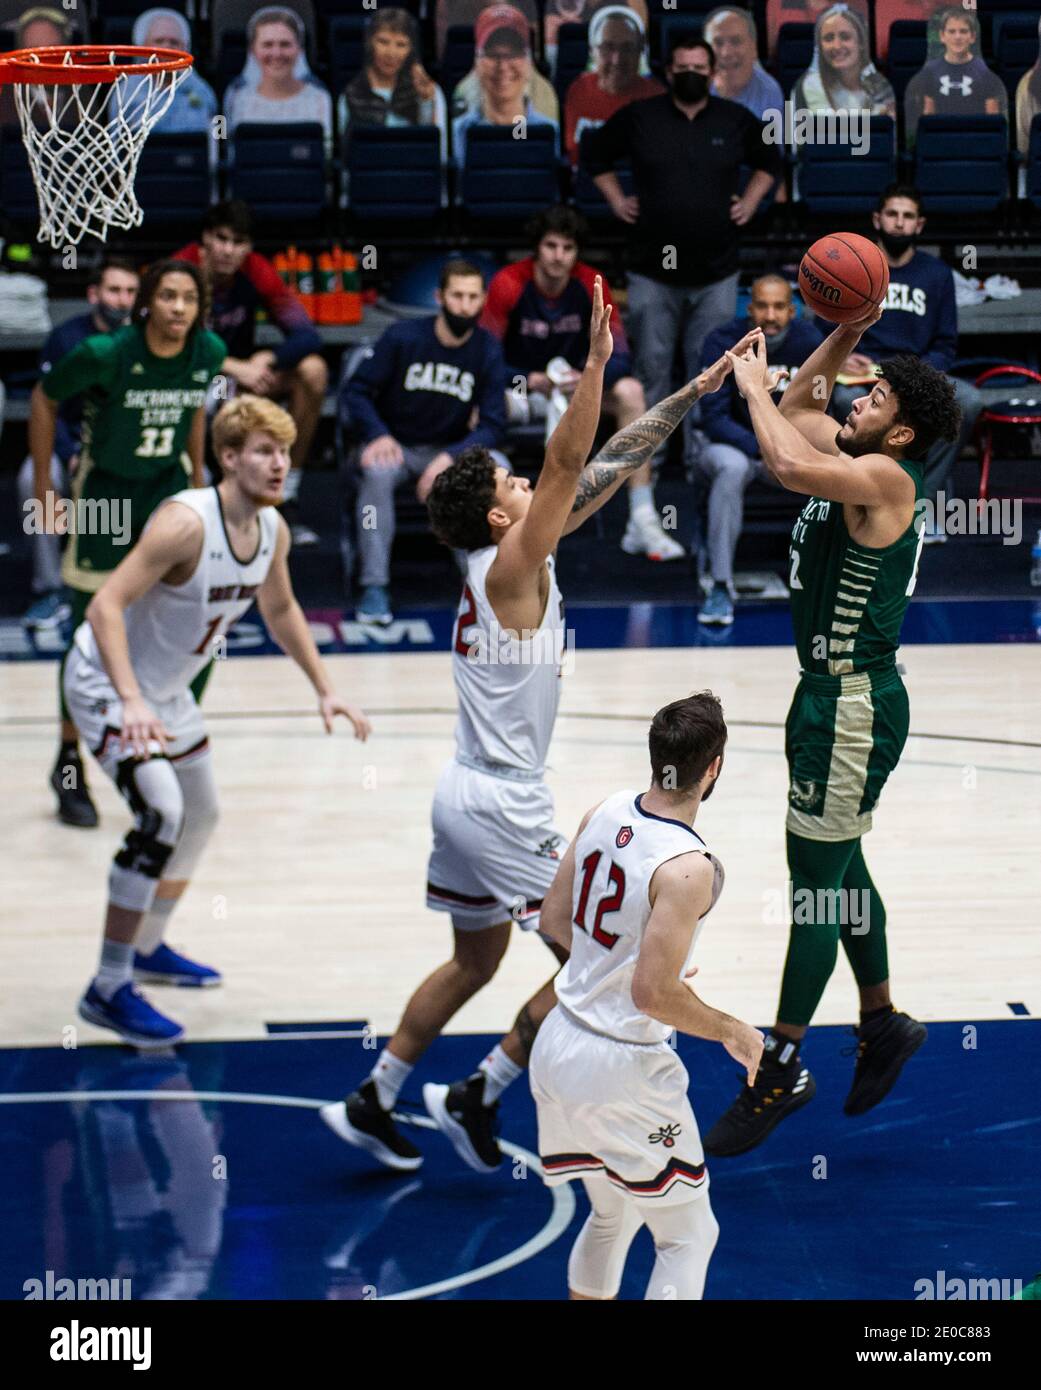 Moraga, CA U.S. 30th Dec, 2020. A. Sacramento State Hornets forward Ethan Esposito (22) takes a shot at the top of the key during the NCAA Men's Basketball game between Sacramento State Hornets and the Saint Mary's Gaels 45-63 lost at McKeon Pavilion Moraga Calif. Thurman James/CSM/Alamy Live News Stock Photo